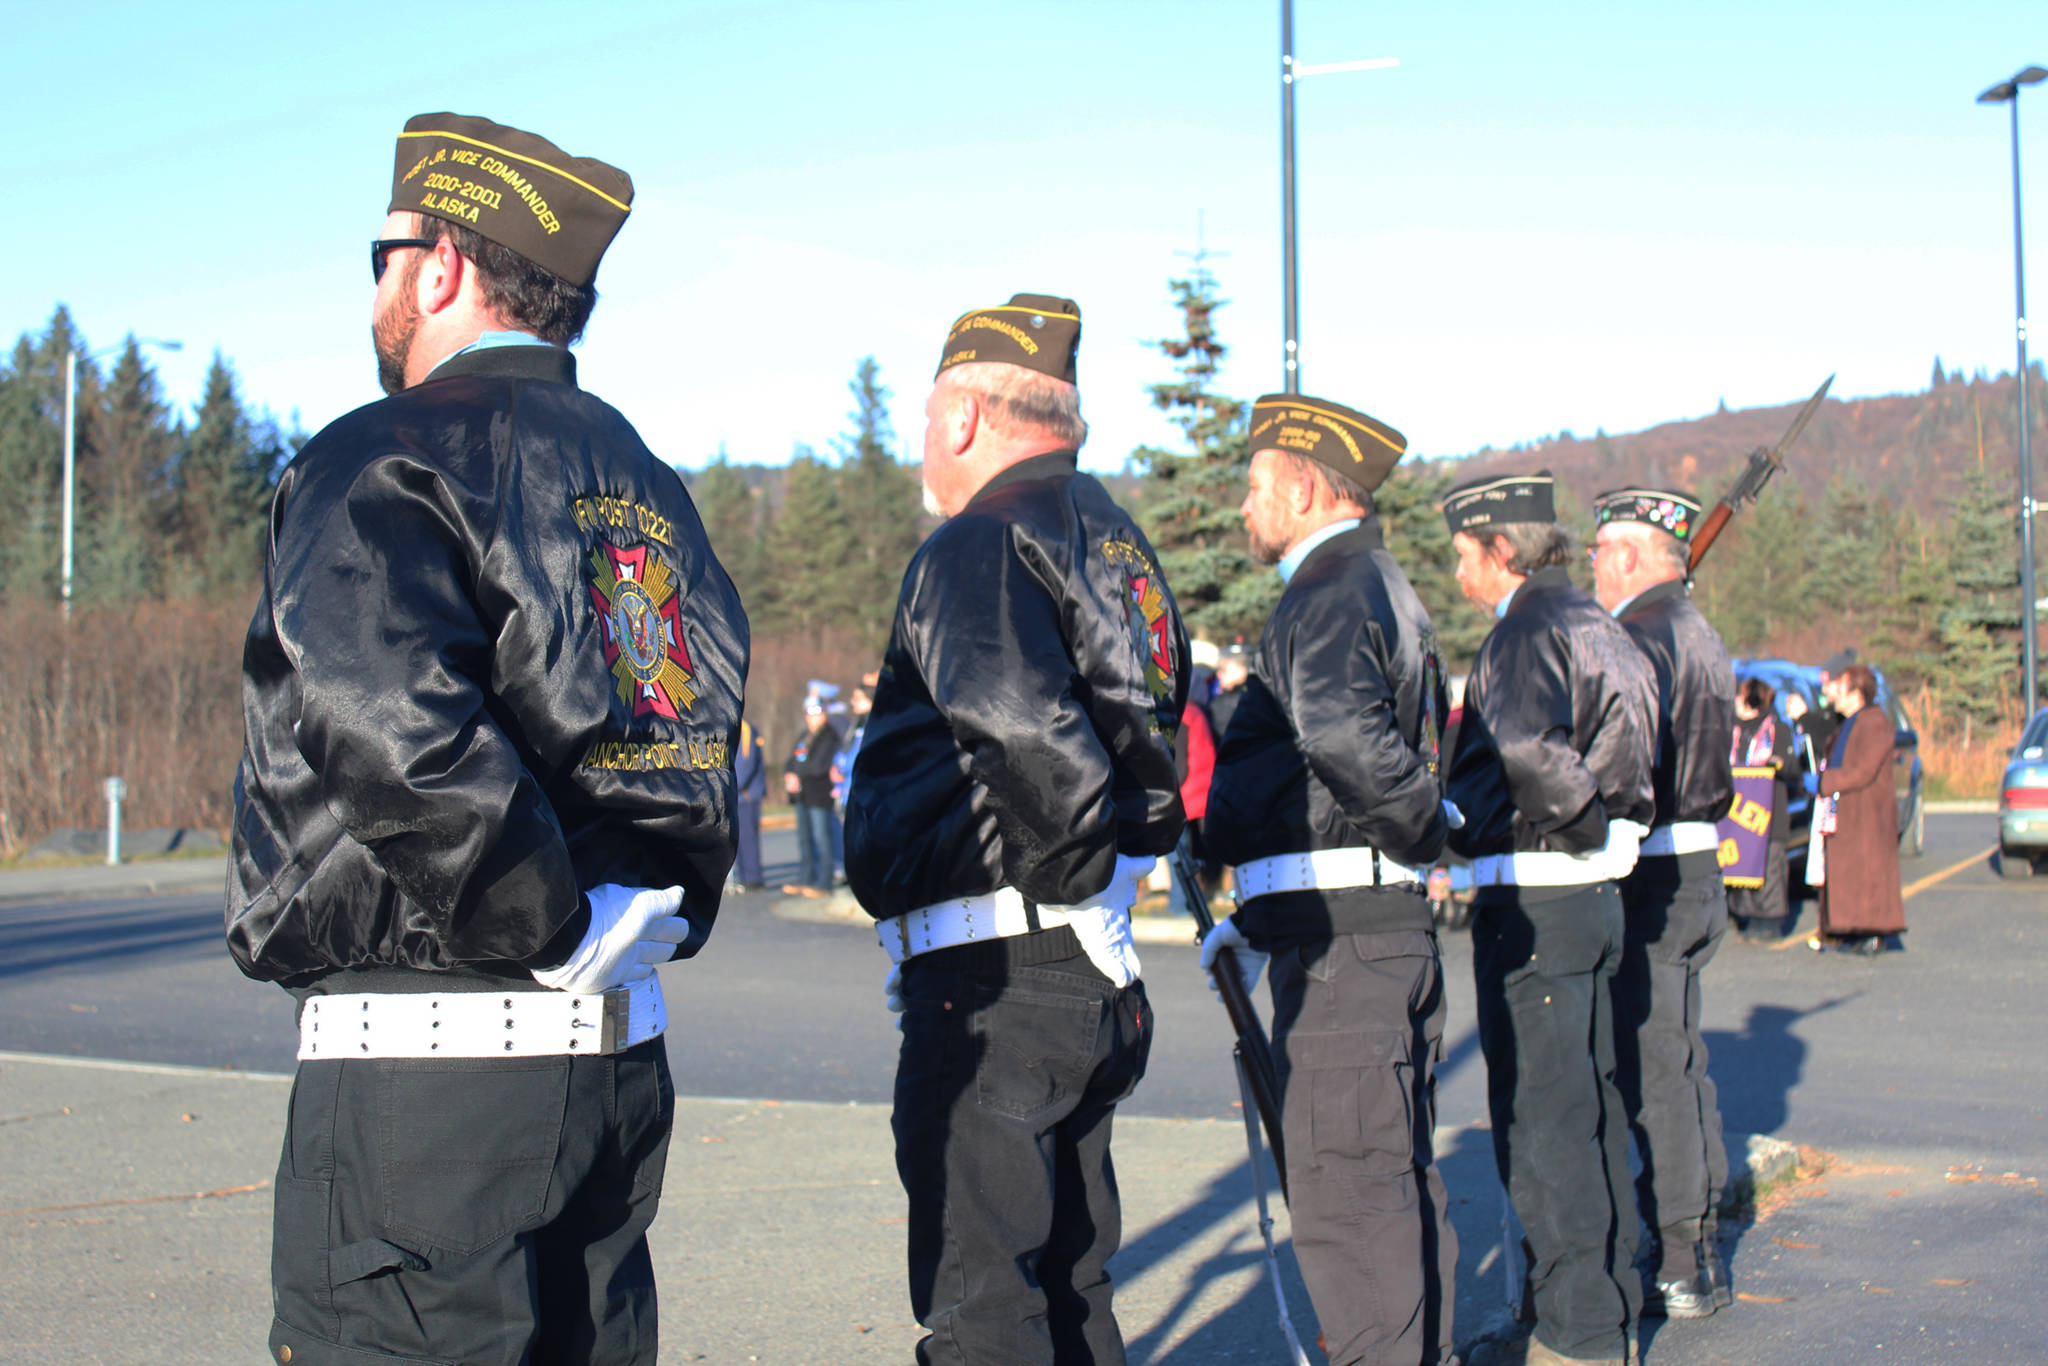 Members of the VFW Post in Anchor Point listen during a presentation for Veterans Day on Saturday, Nov. 11, 2017 at the Ocean and Islands Center in Homer, Alaska. (Photo by Megan Pacer/Homer News)